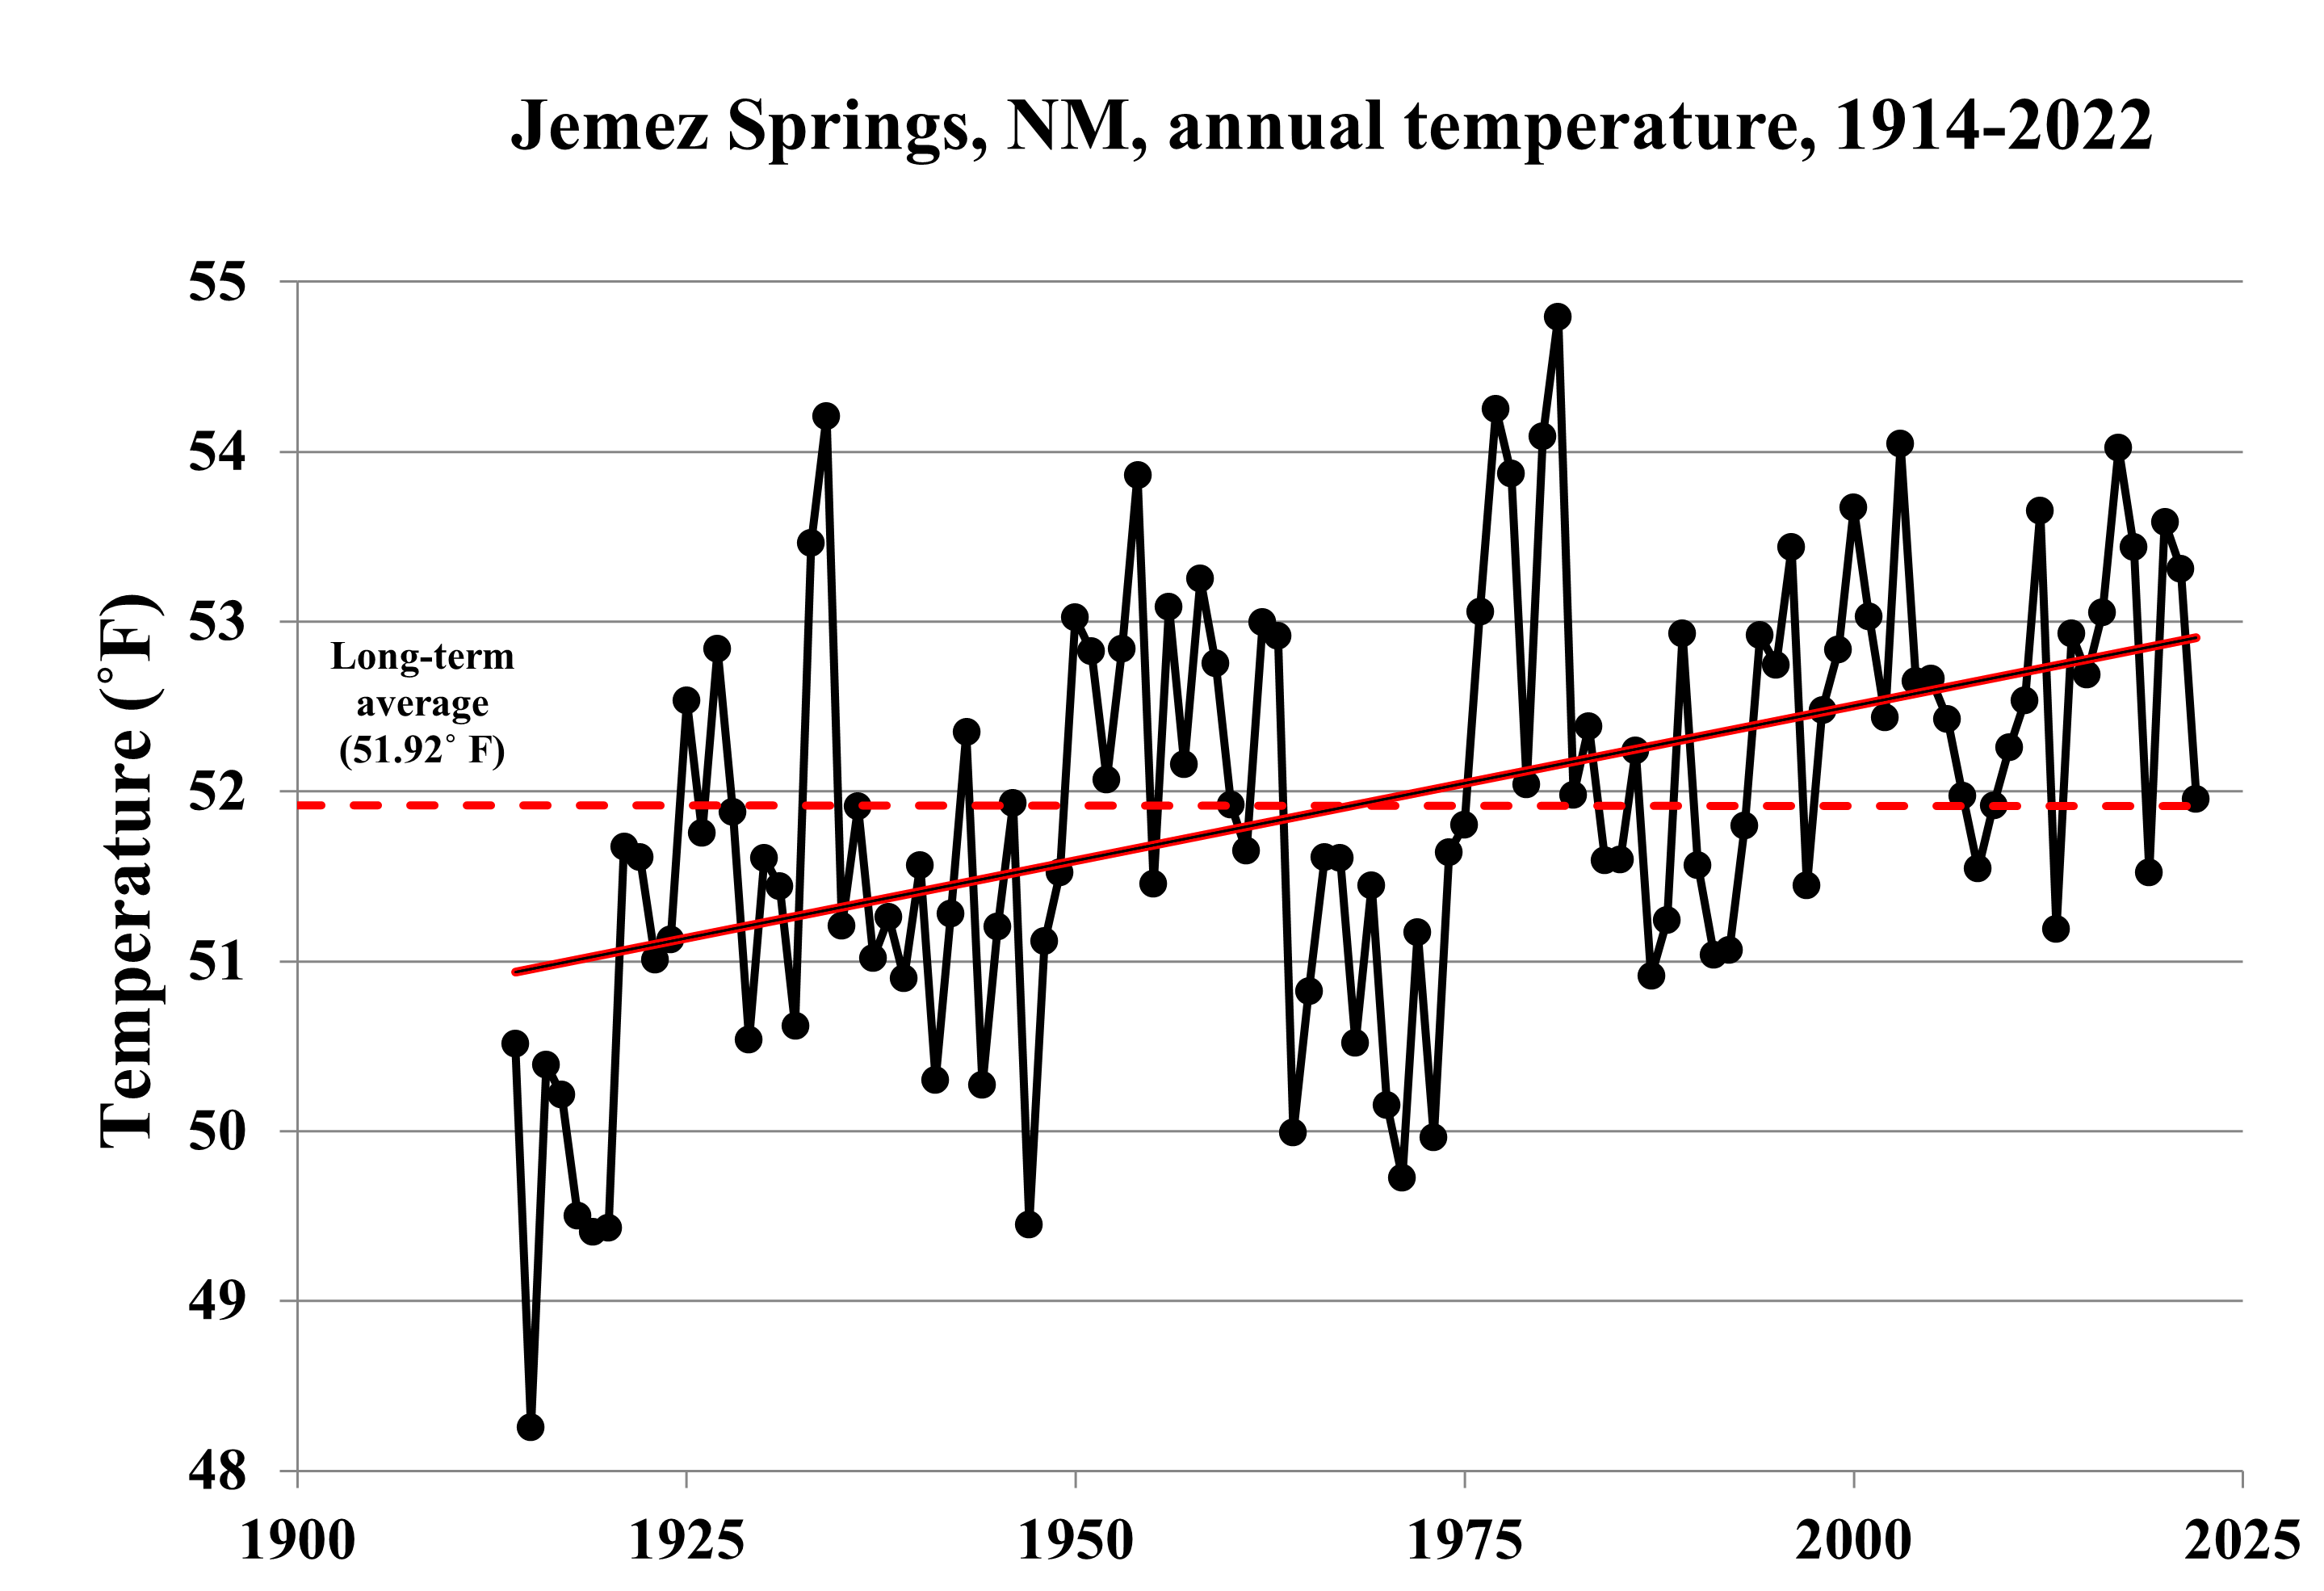 A graph showing annual temperatures in Jemez Springs, NM, from 1914 to 2022. The temperatures show a rising pattern.